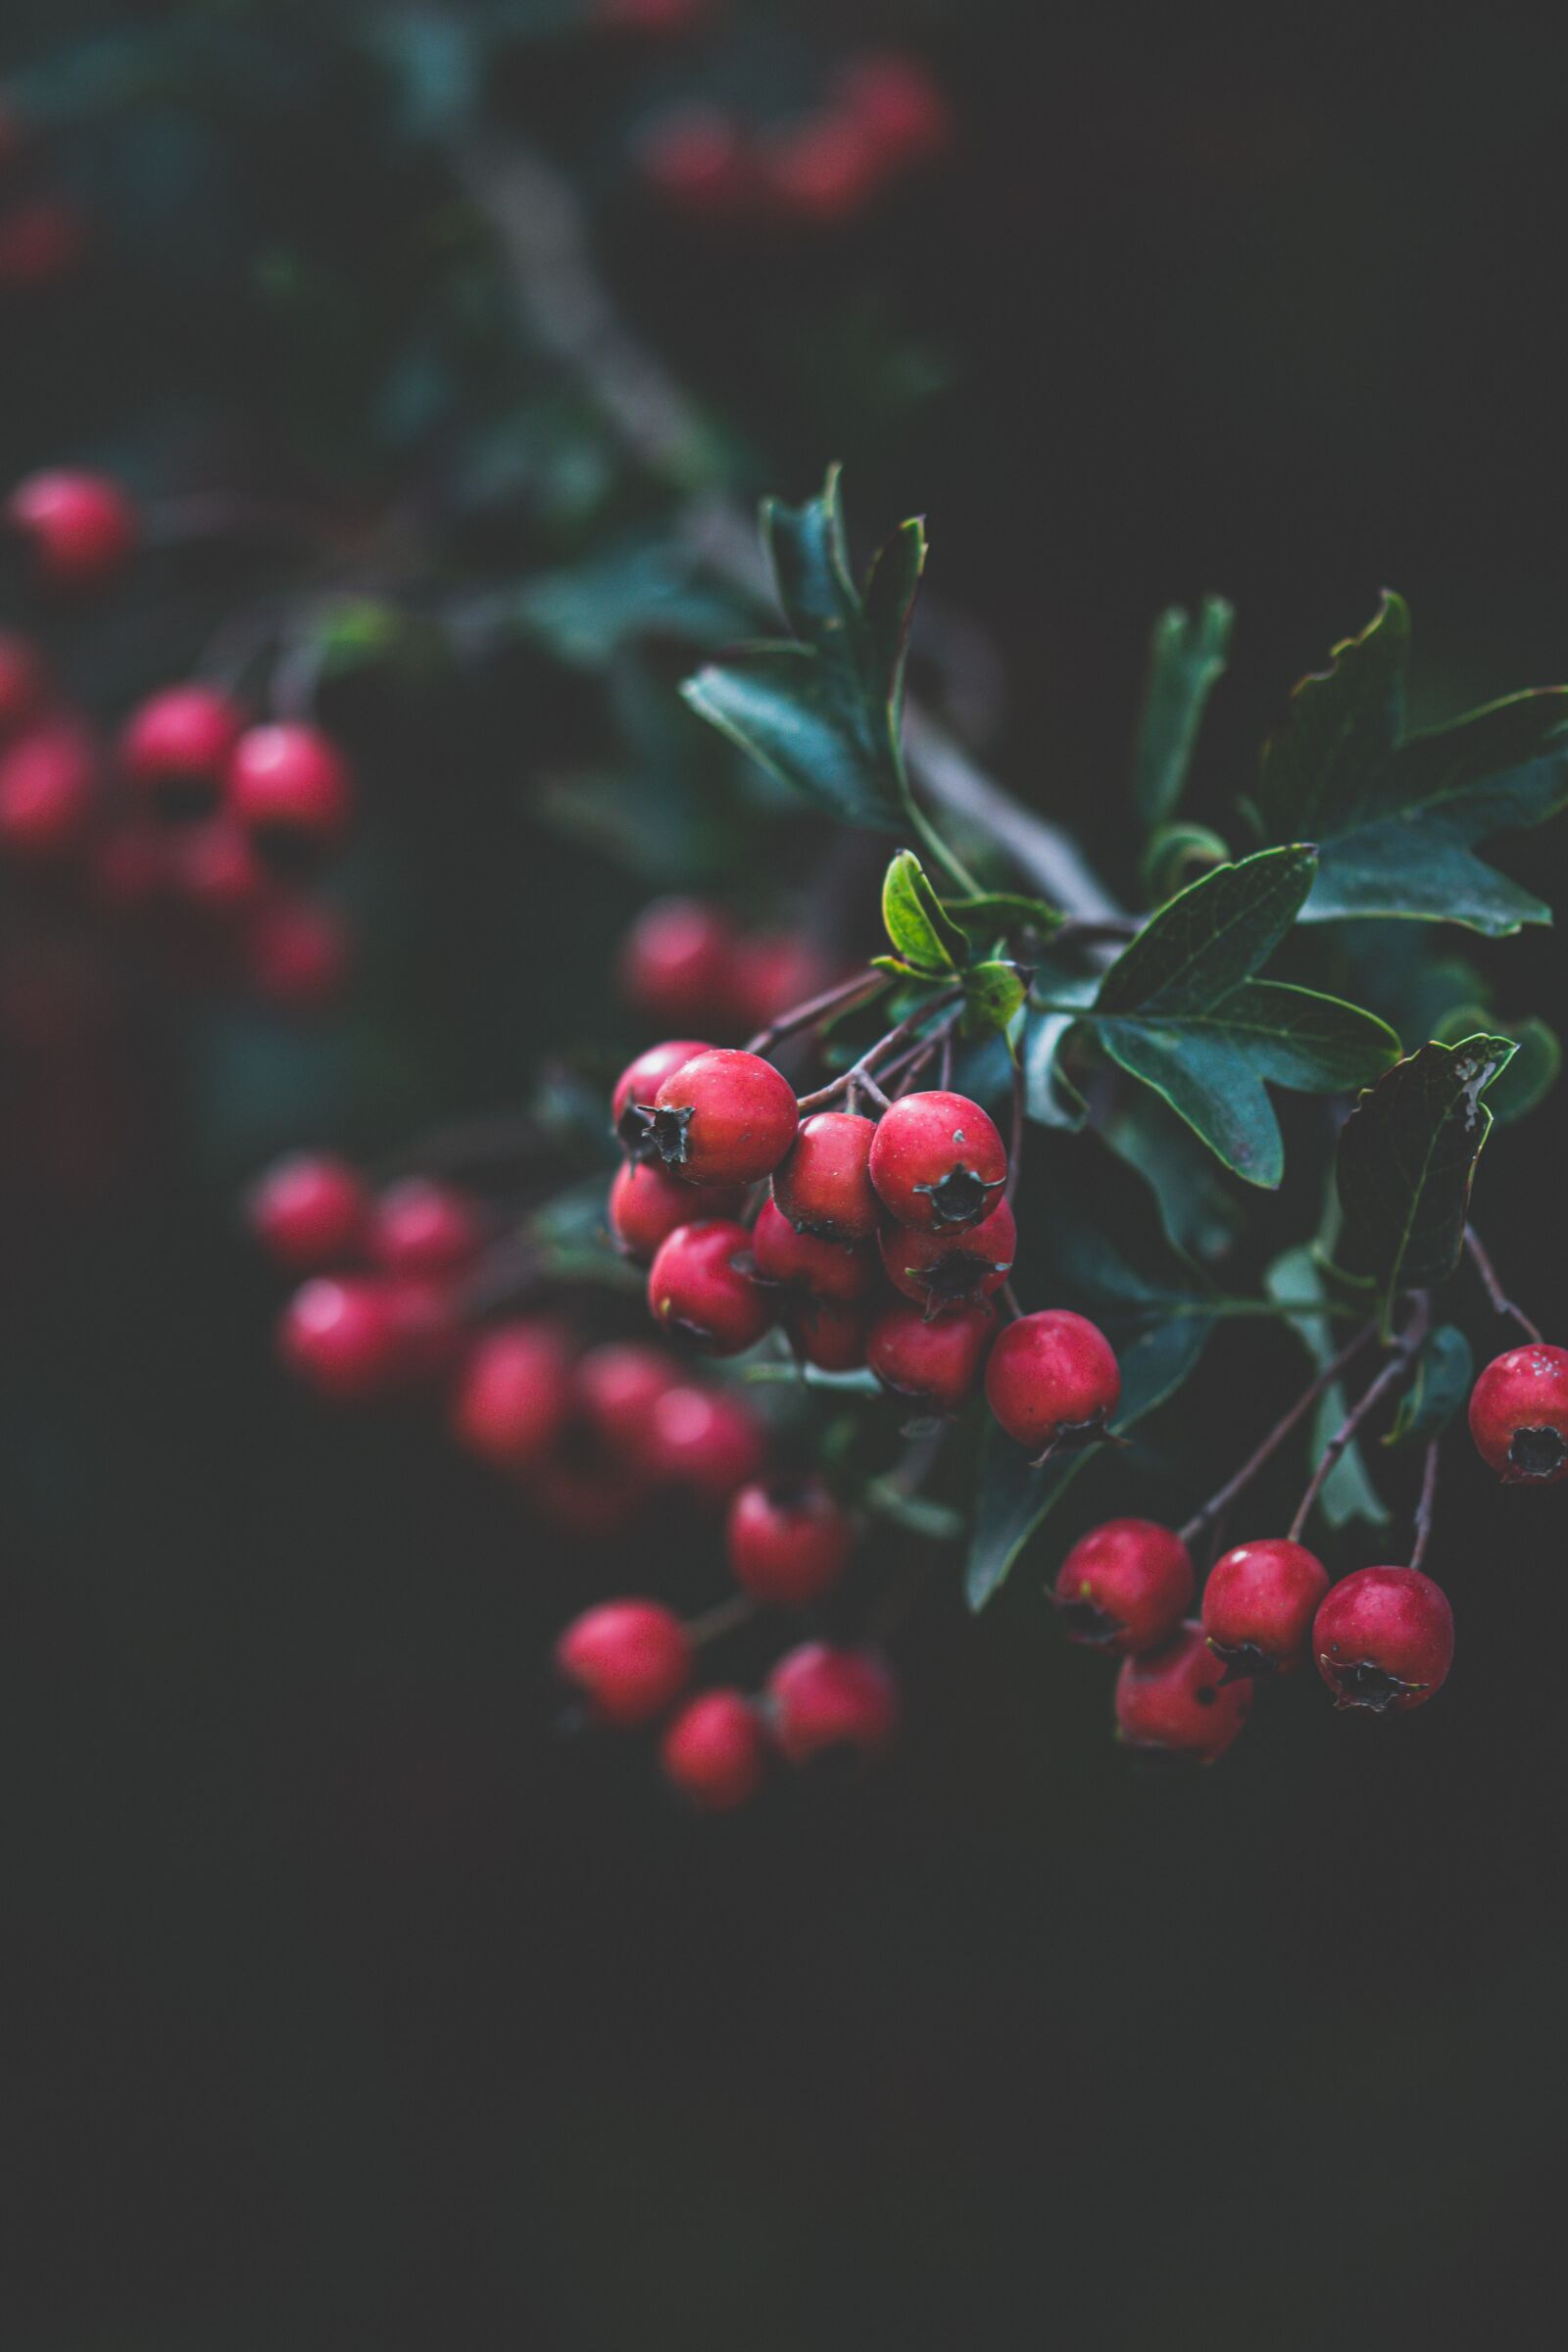 105mm F2.8 sample photo. Berries, plants, nature photography